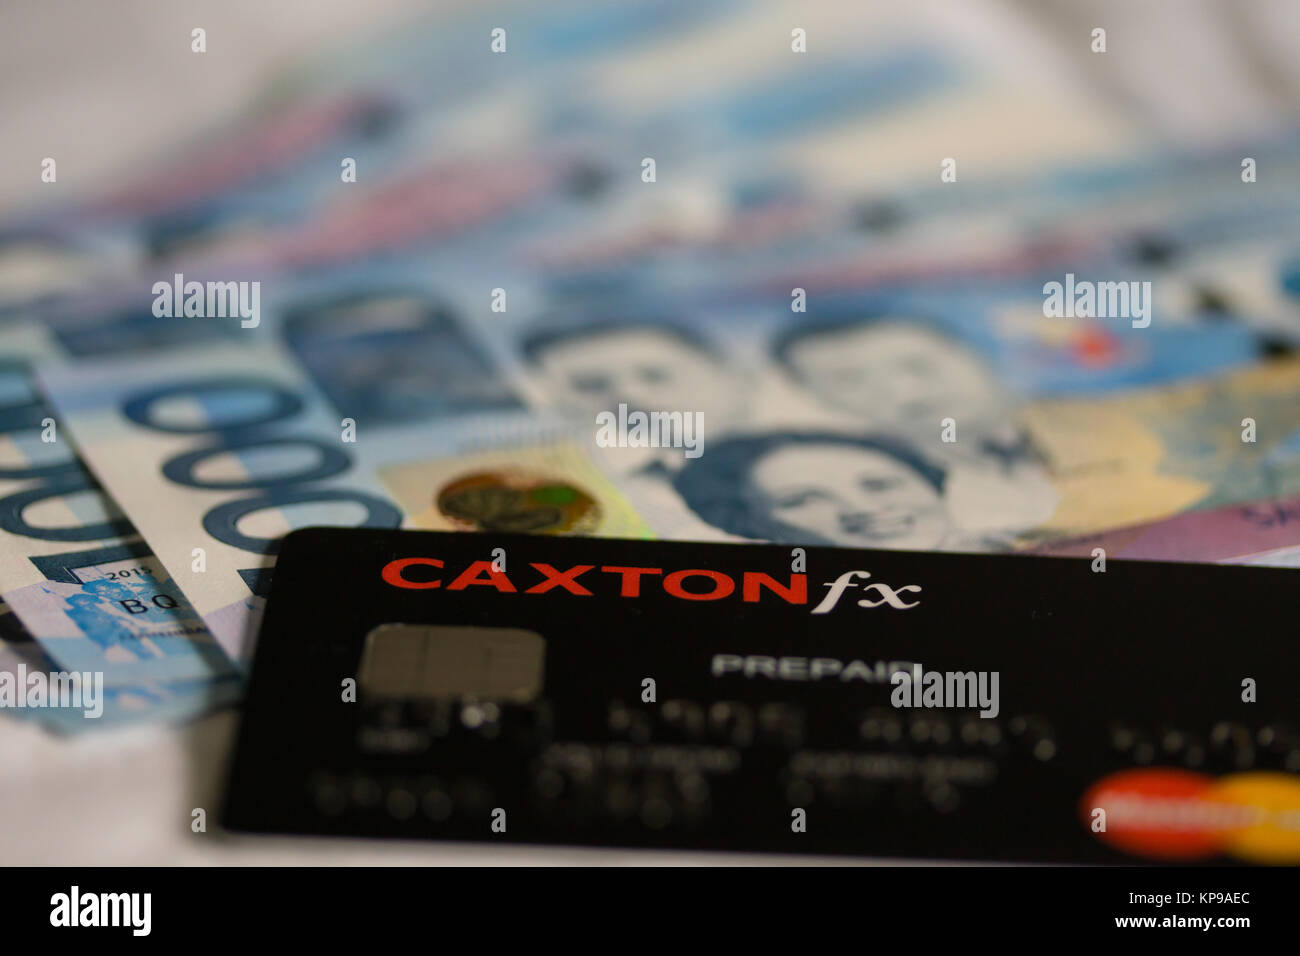 Concept image of going on holiday using a Caxton FX prepiad currency card. Stock Photo